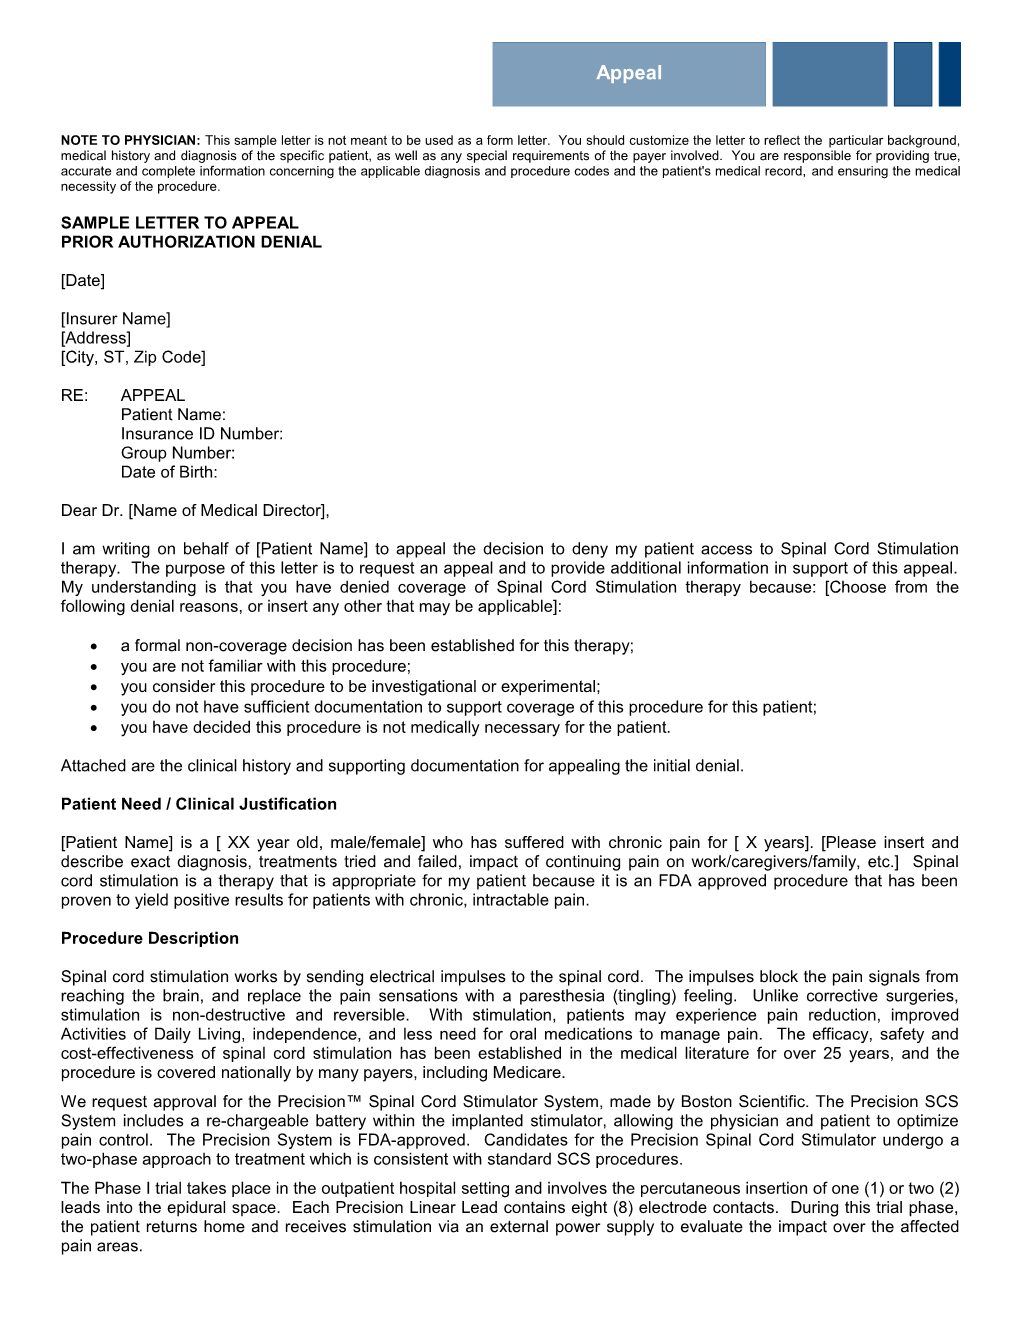 Sample Letter to Appeal